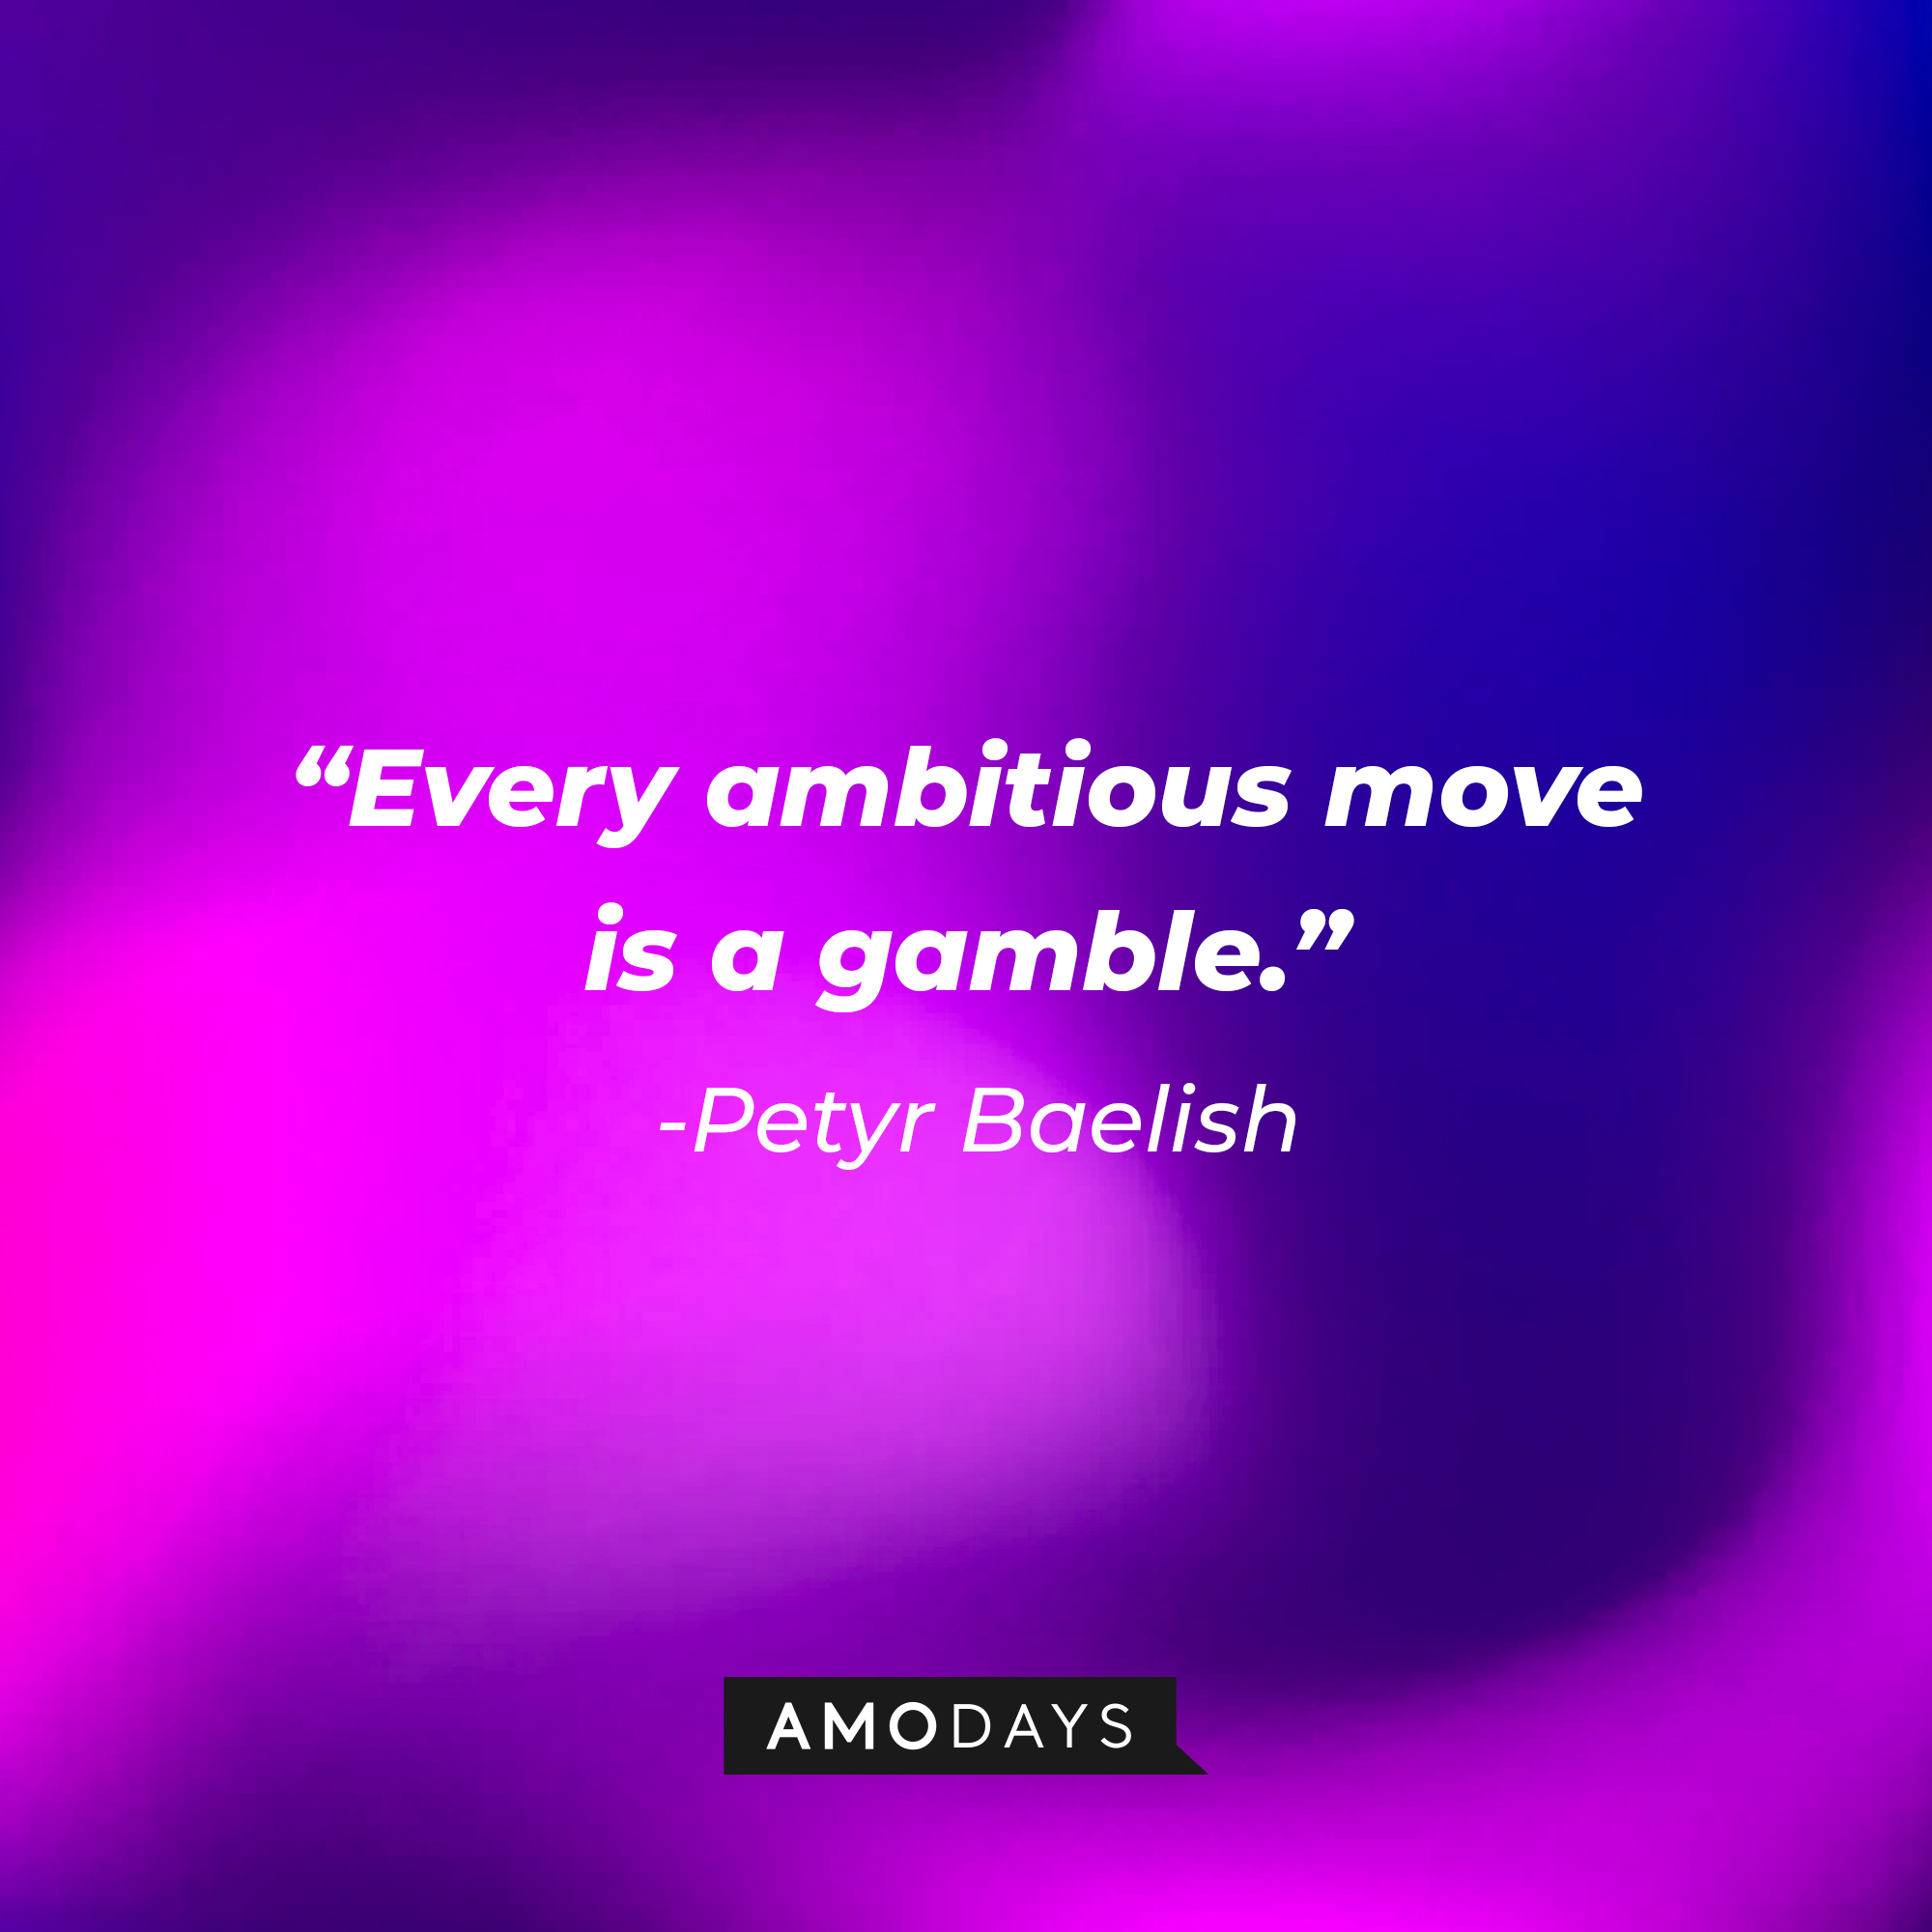 Petyr Baelish’s quote: “Every ambitious move is a gamble.” | Source: AmoDays